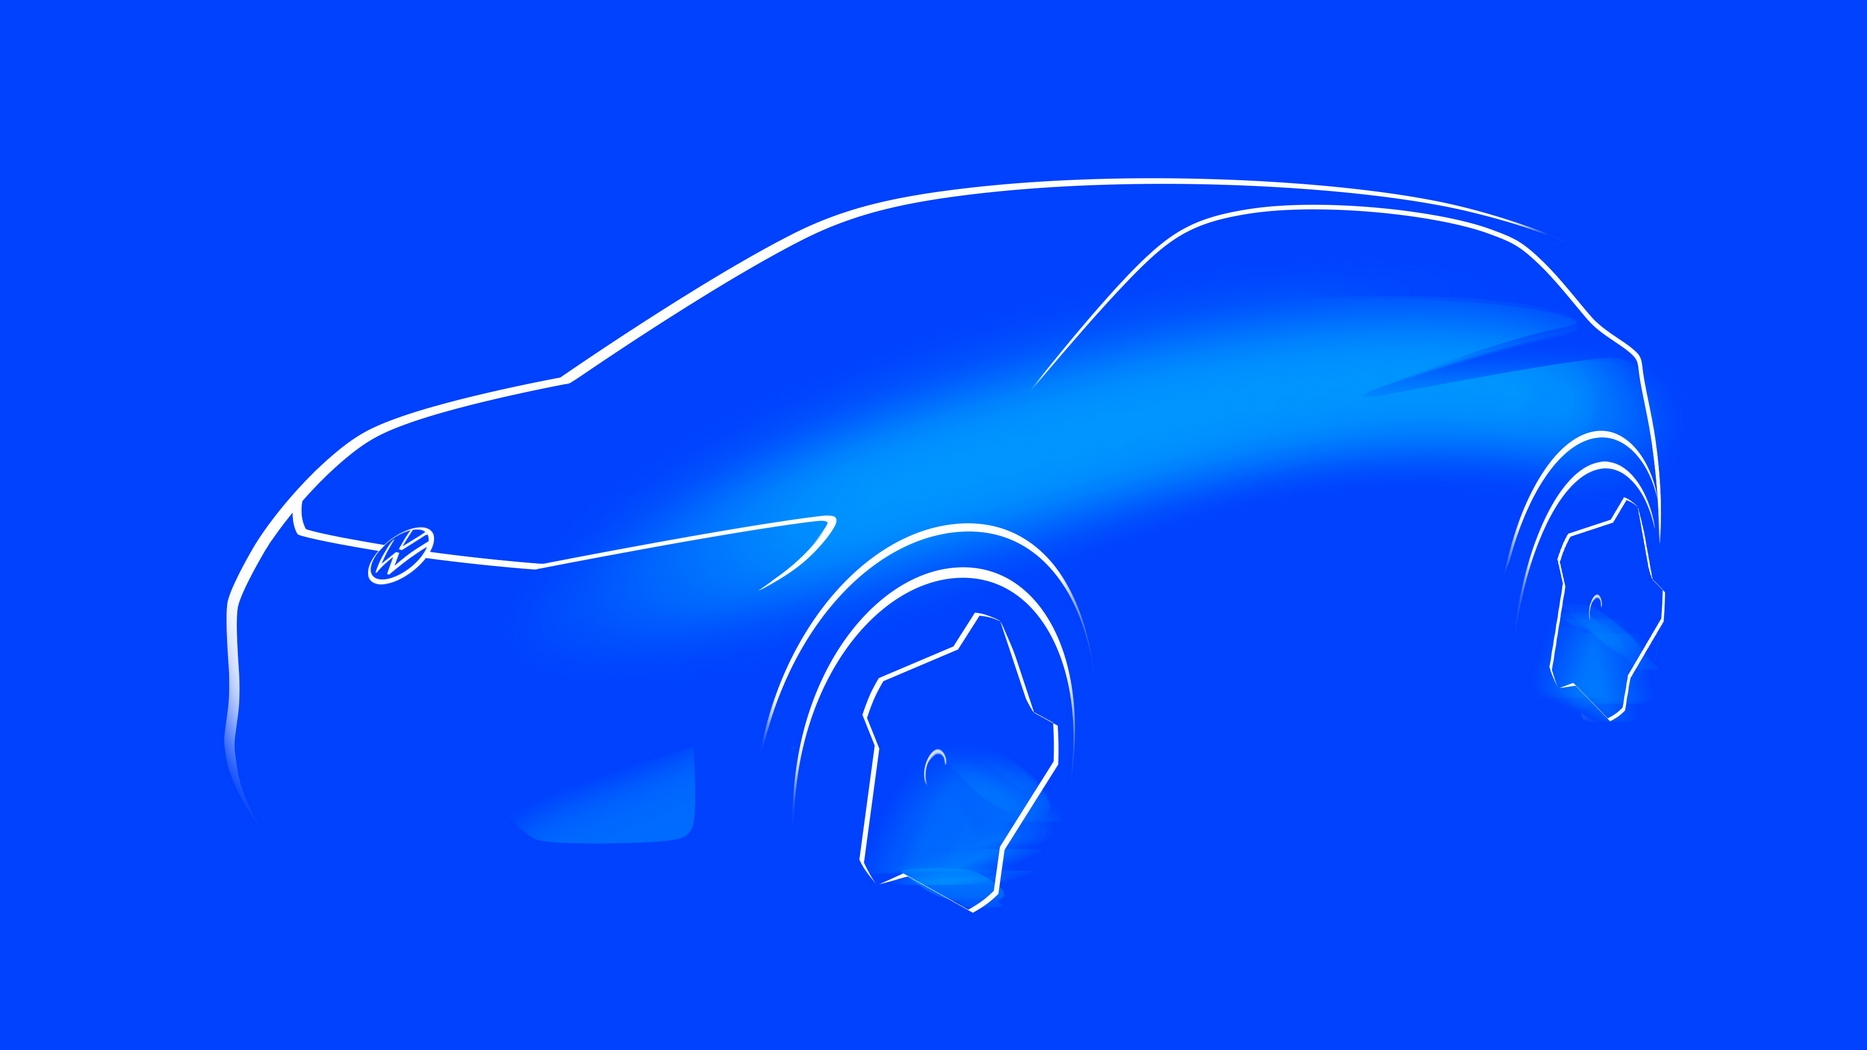 Teaser for Volkswagen electric subcompact